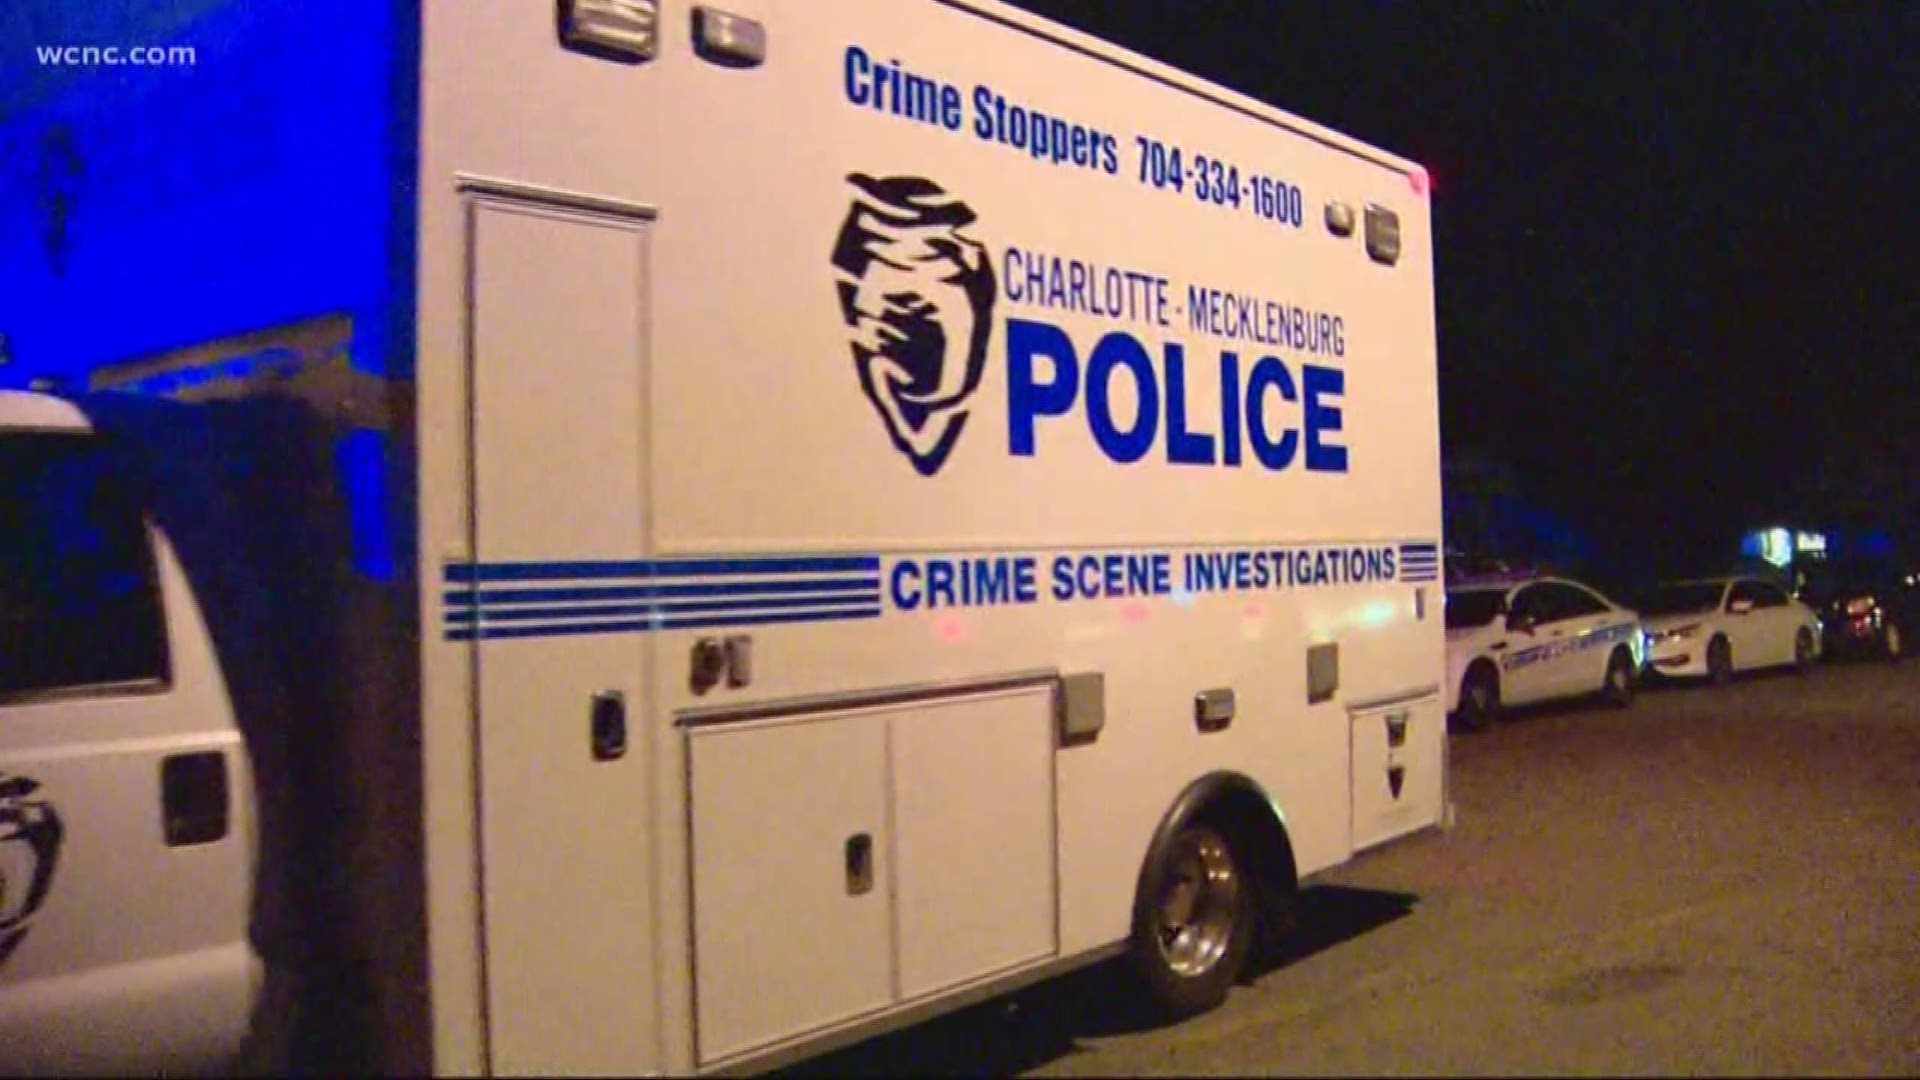 Police are investigating after a man was found shot to death in southwest Charlotte late Sunday night. No arrests have been made at this time.